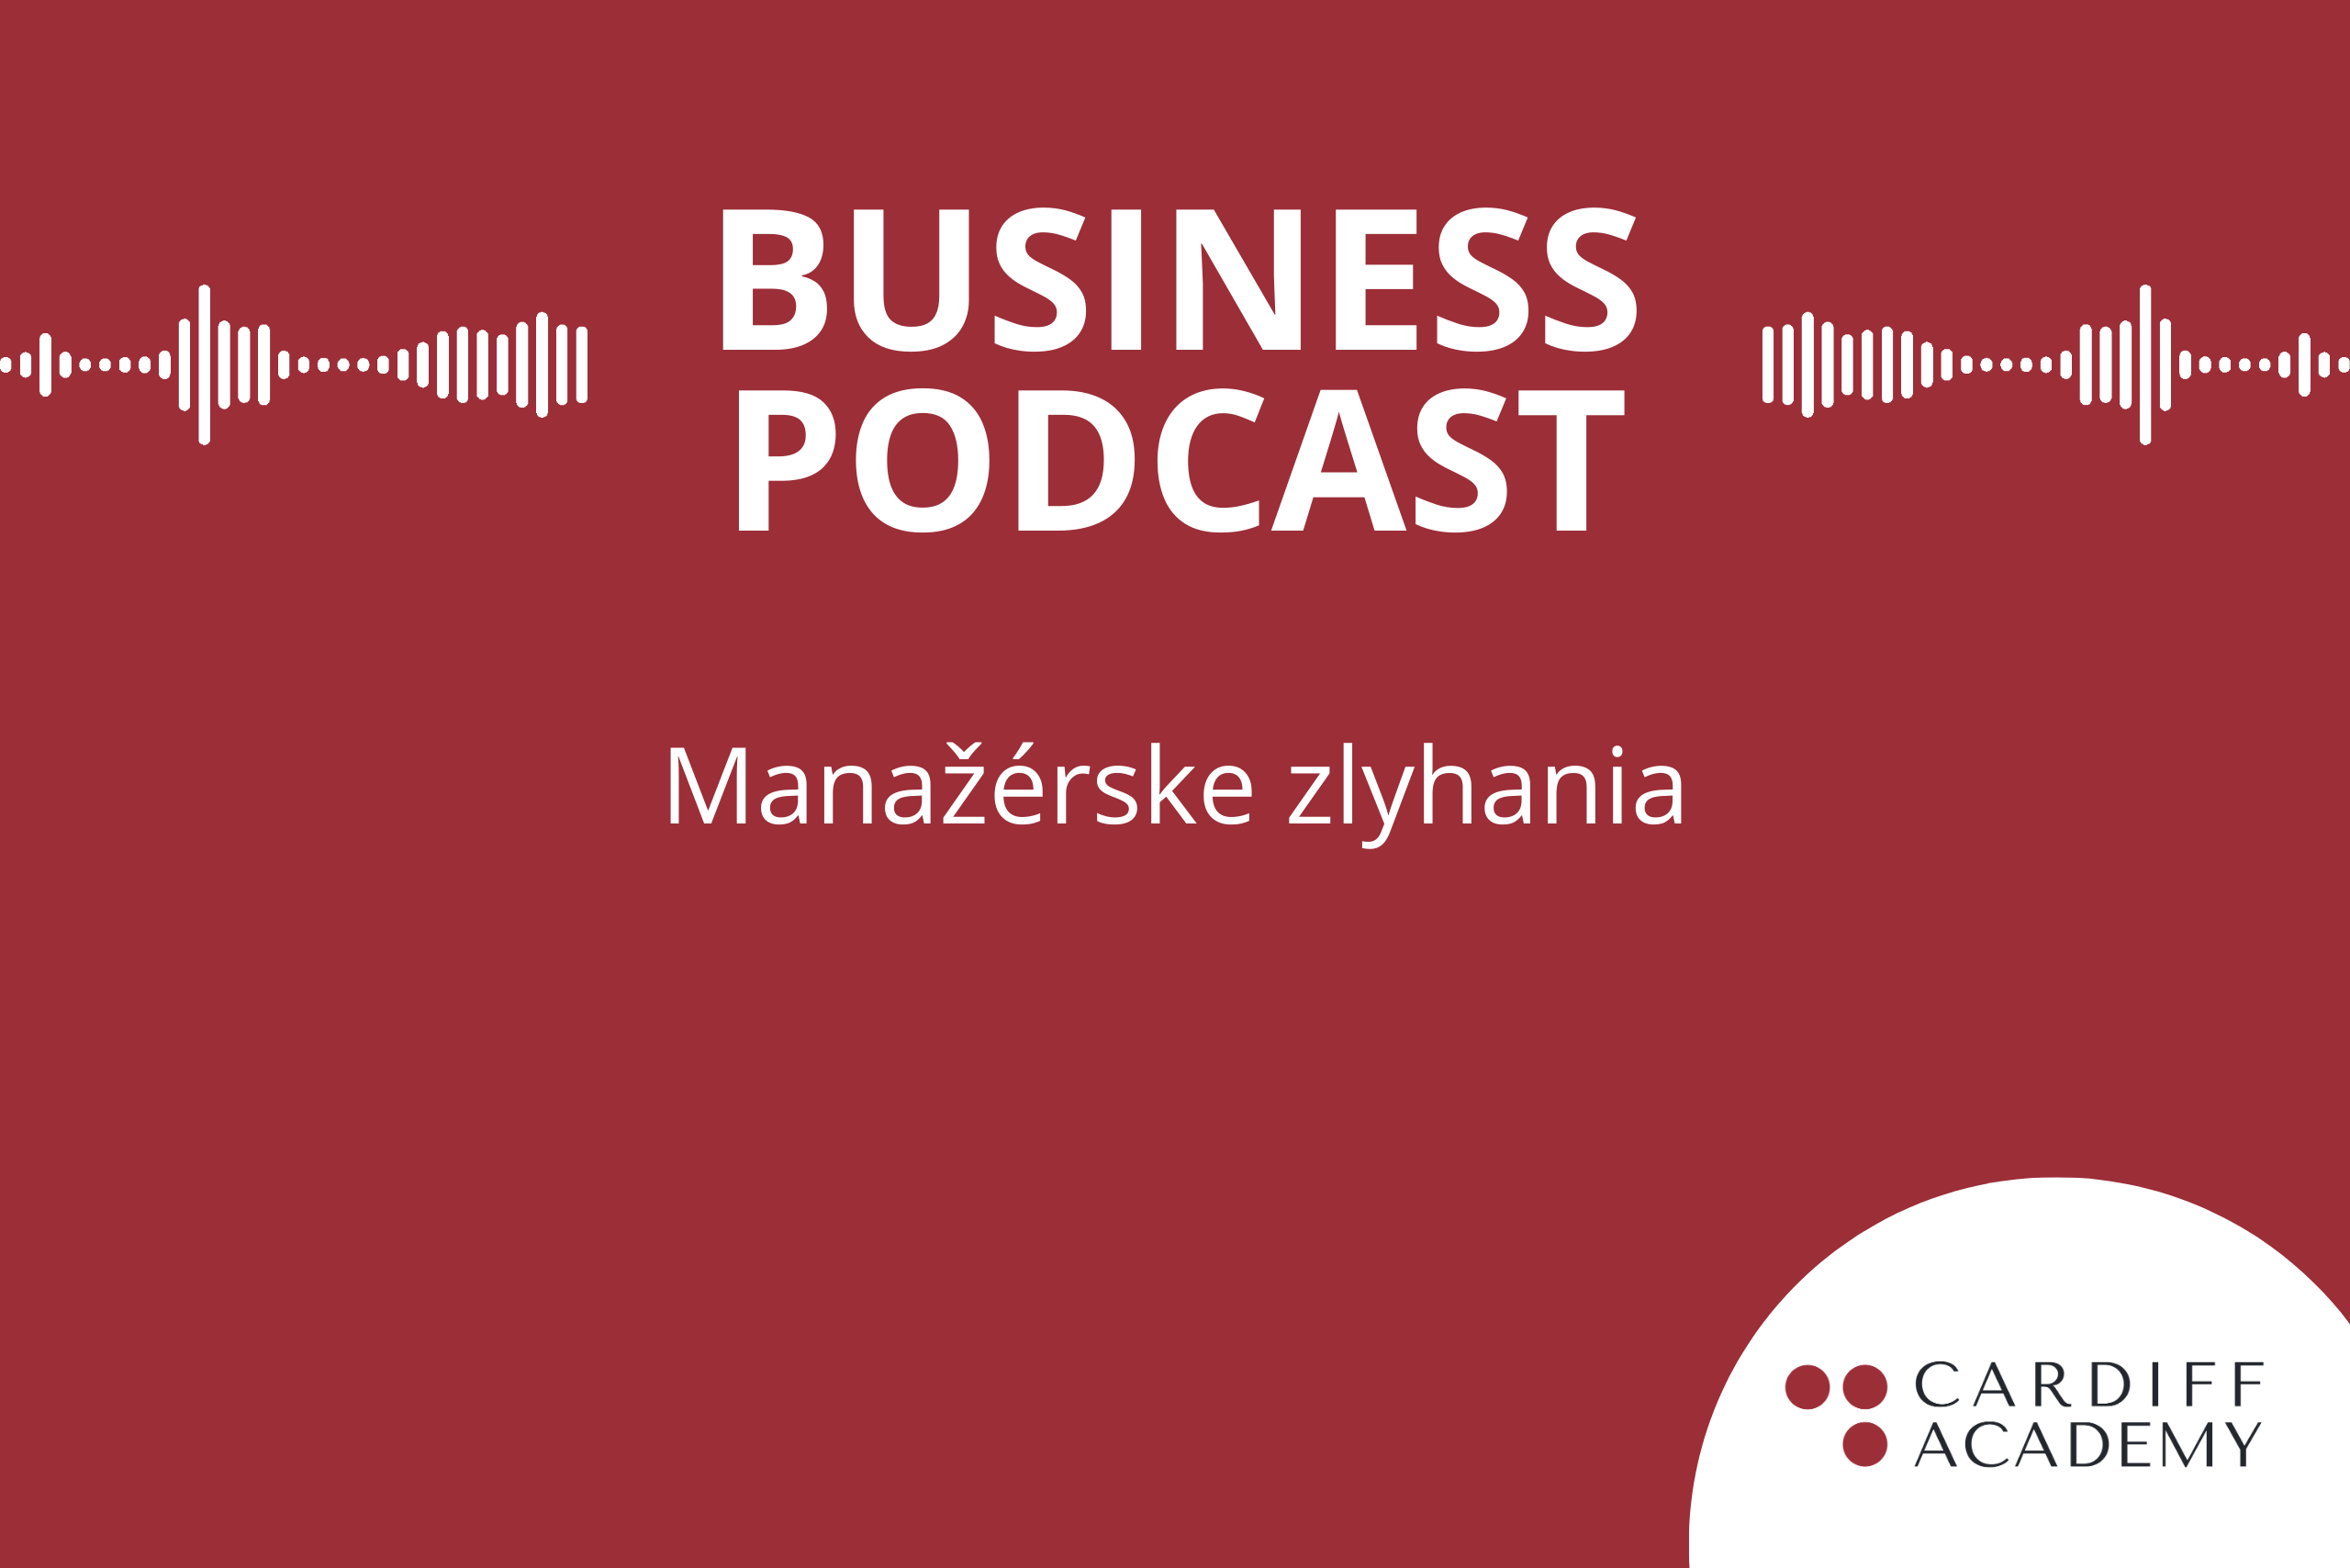 BUSINESS PODCAST